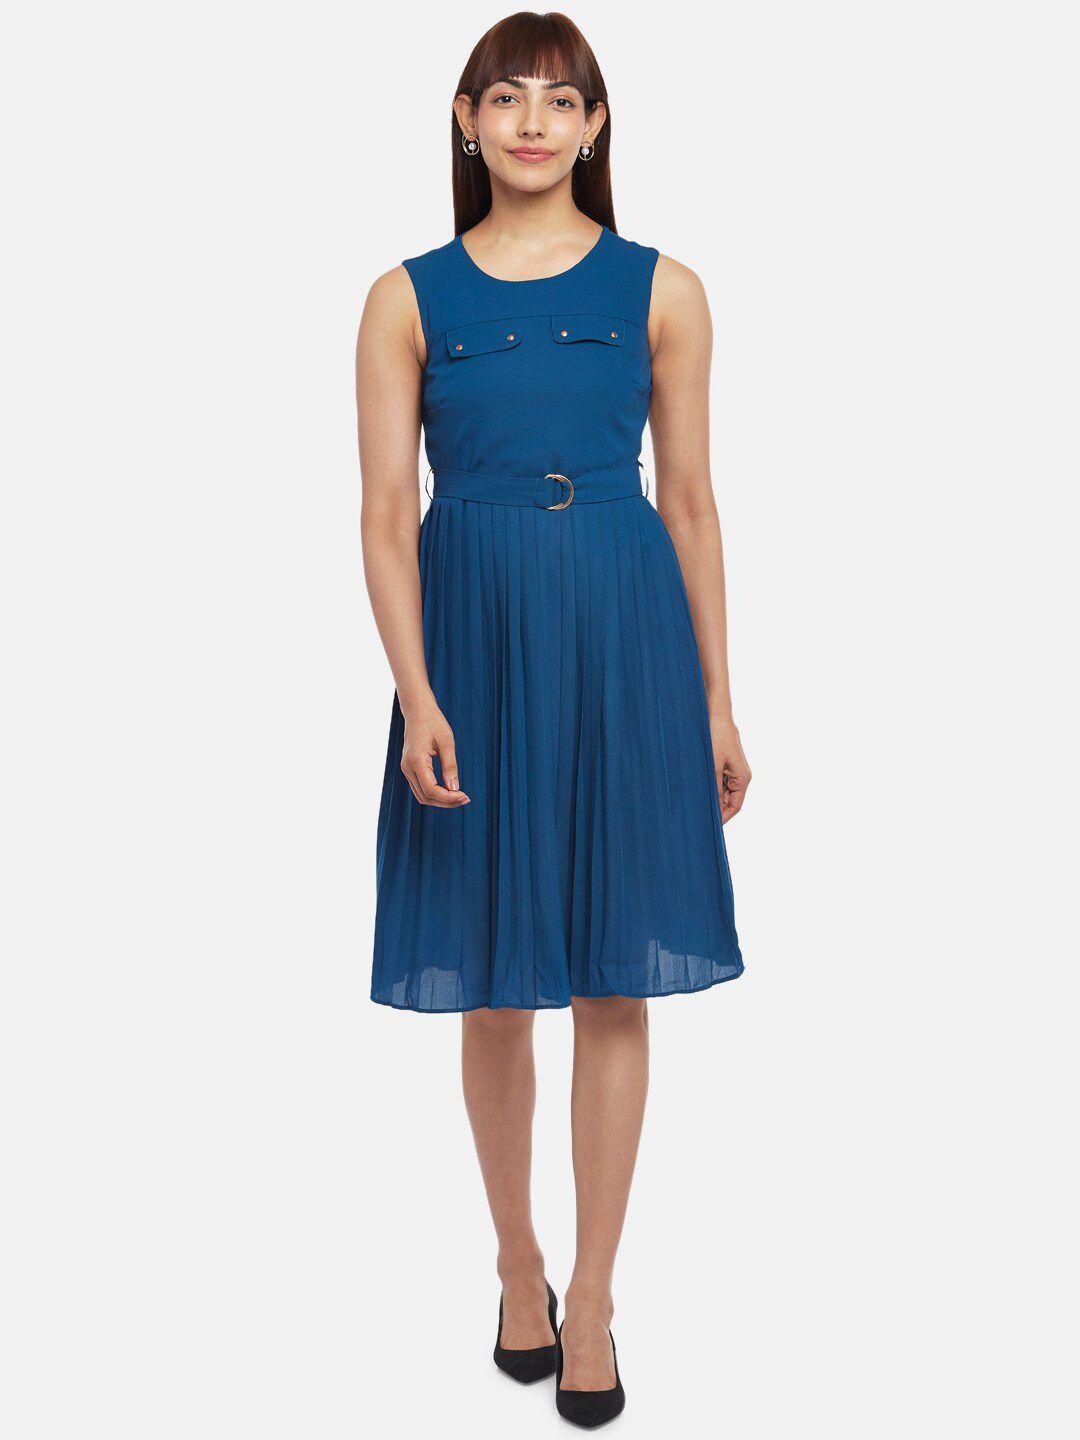 annabelle by pantaloons blue embellished formal dress